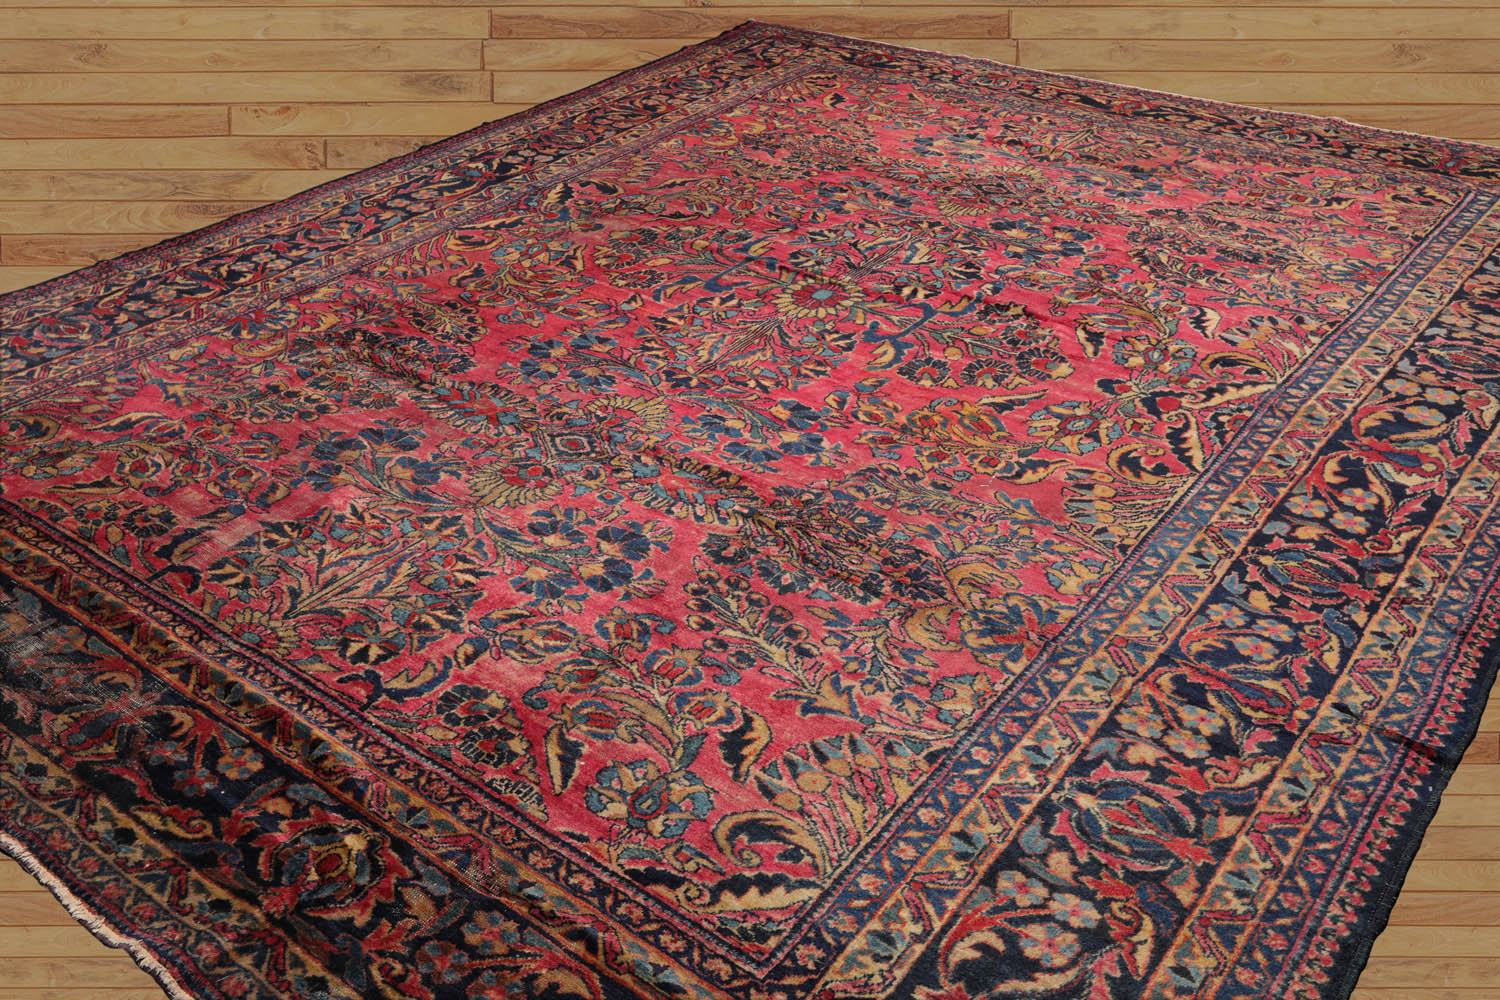 Jakiyla 10x14 Hand Knotted 100% Wool Sarouk Traditional Oriental Area Rug Pink, Navy Color